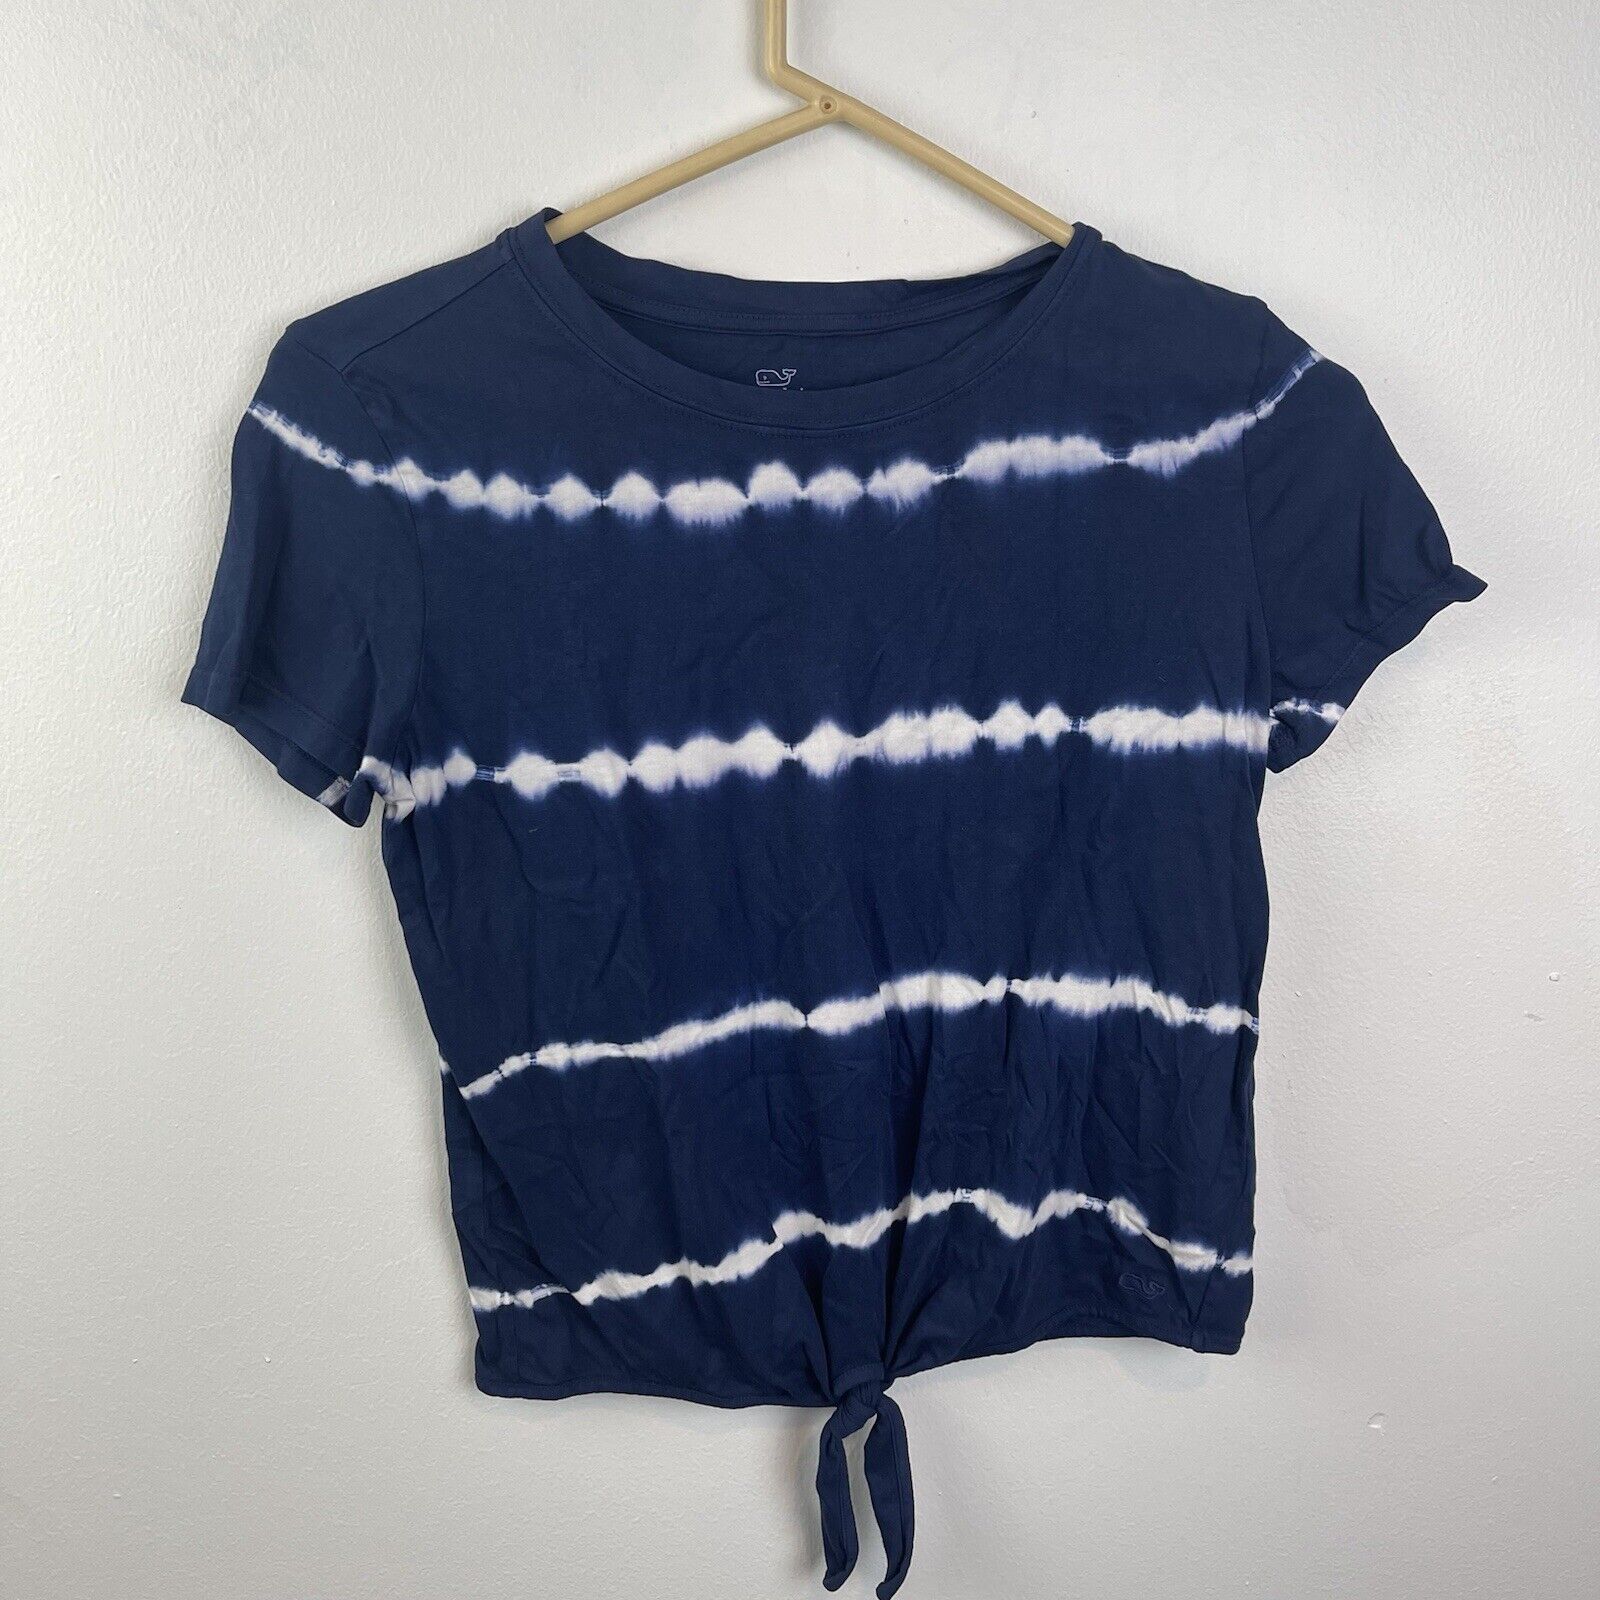 Sale price Vineyard Max 66% OFF Vines Girls Blue & White Size Cropped Top Large